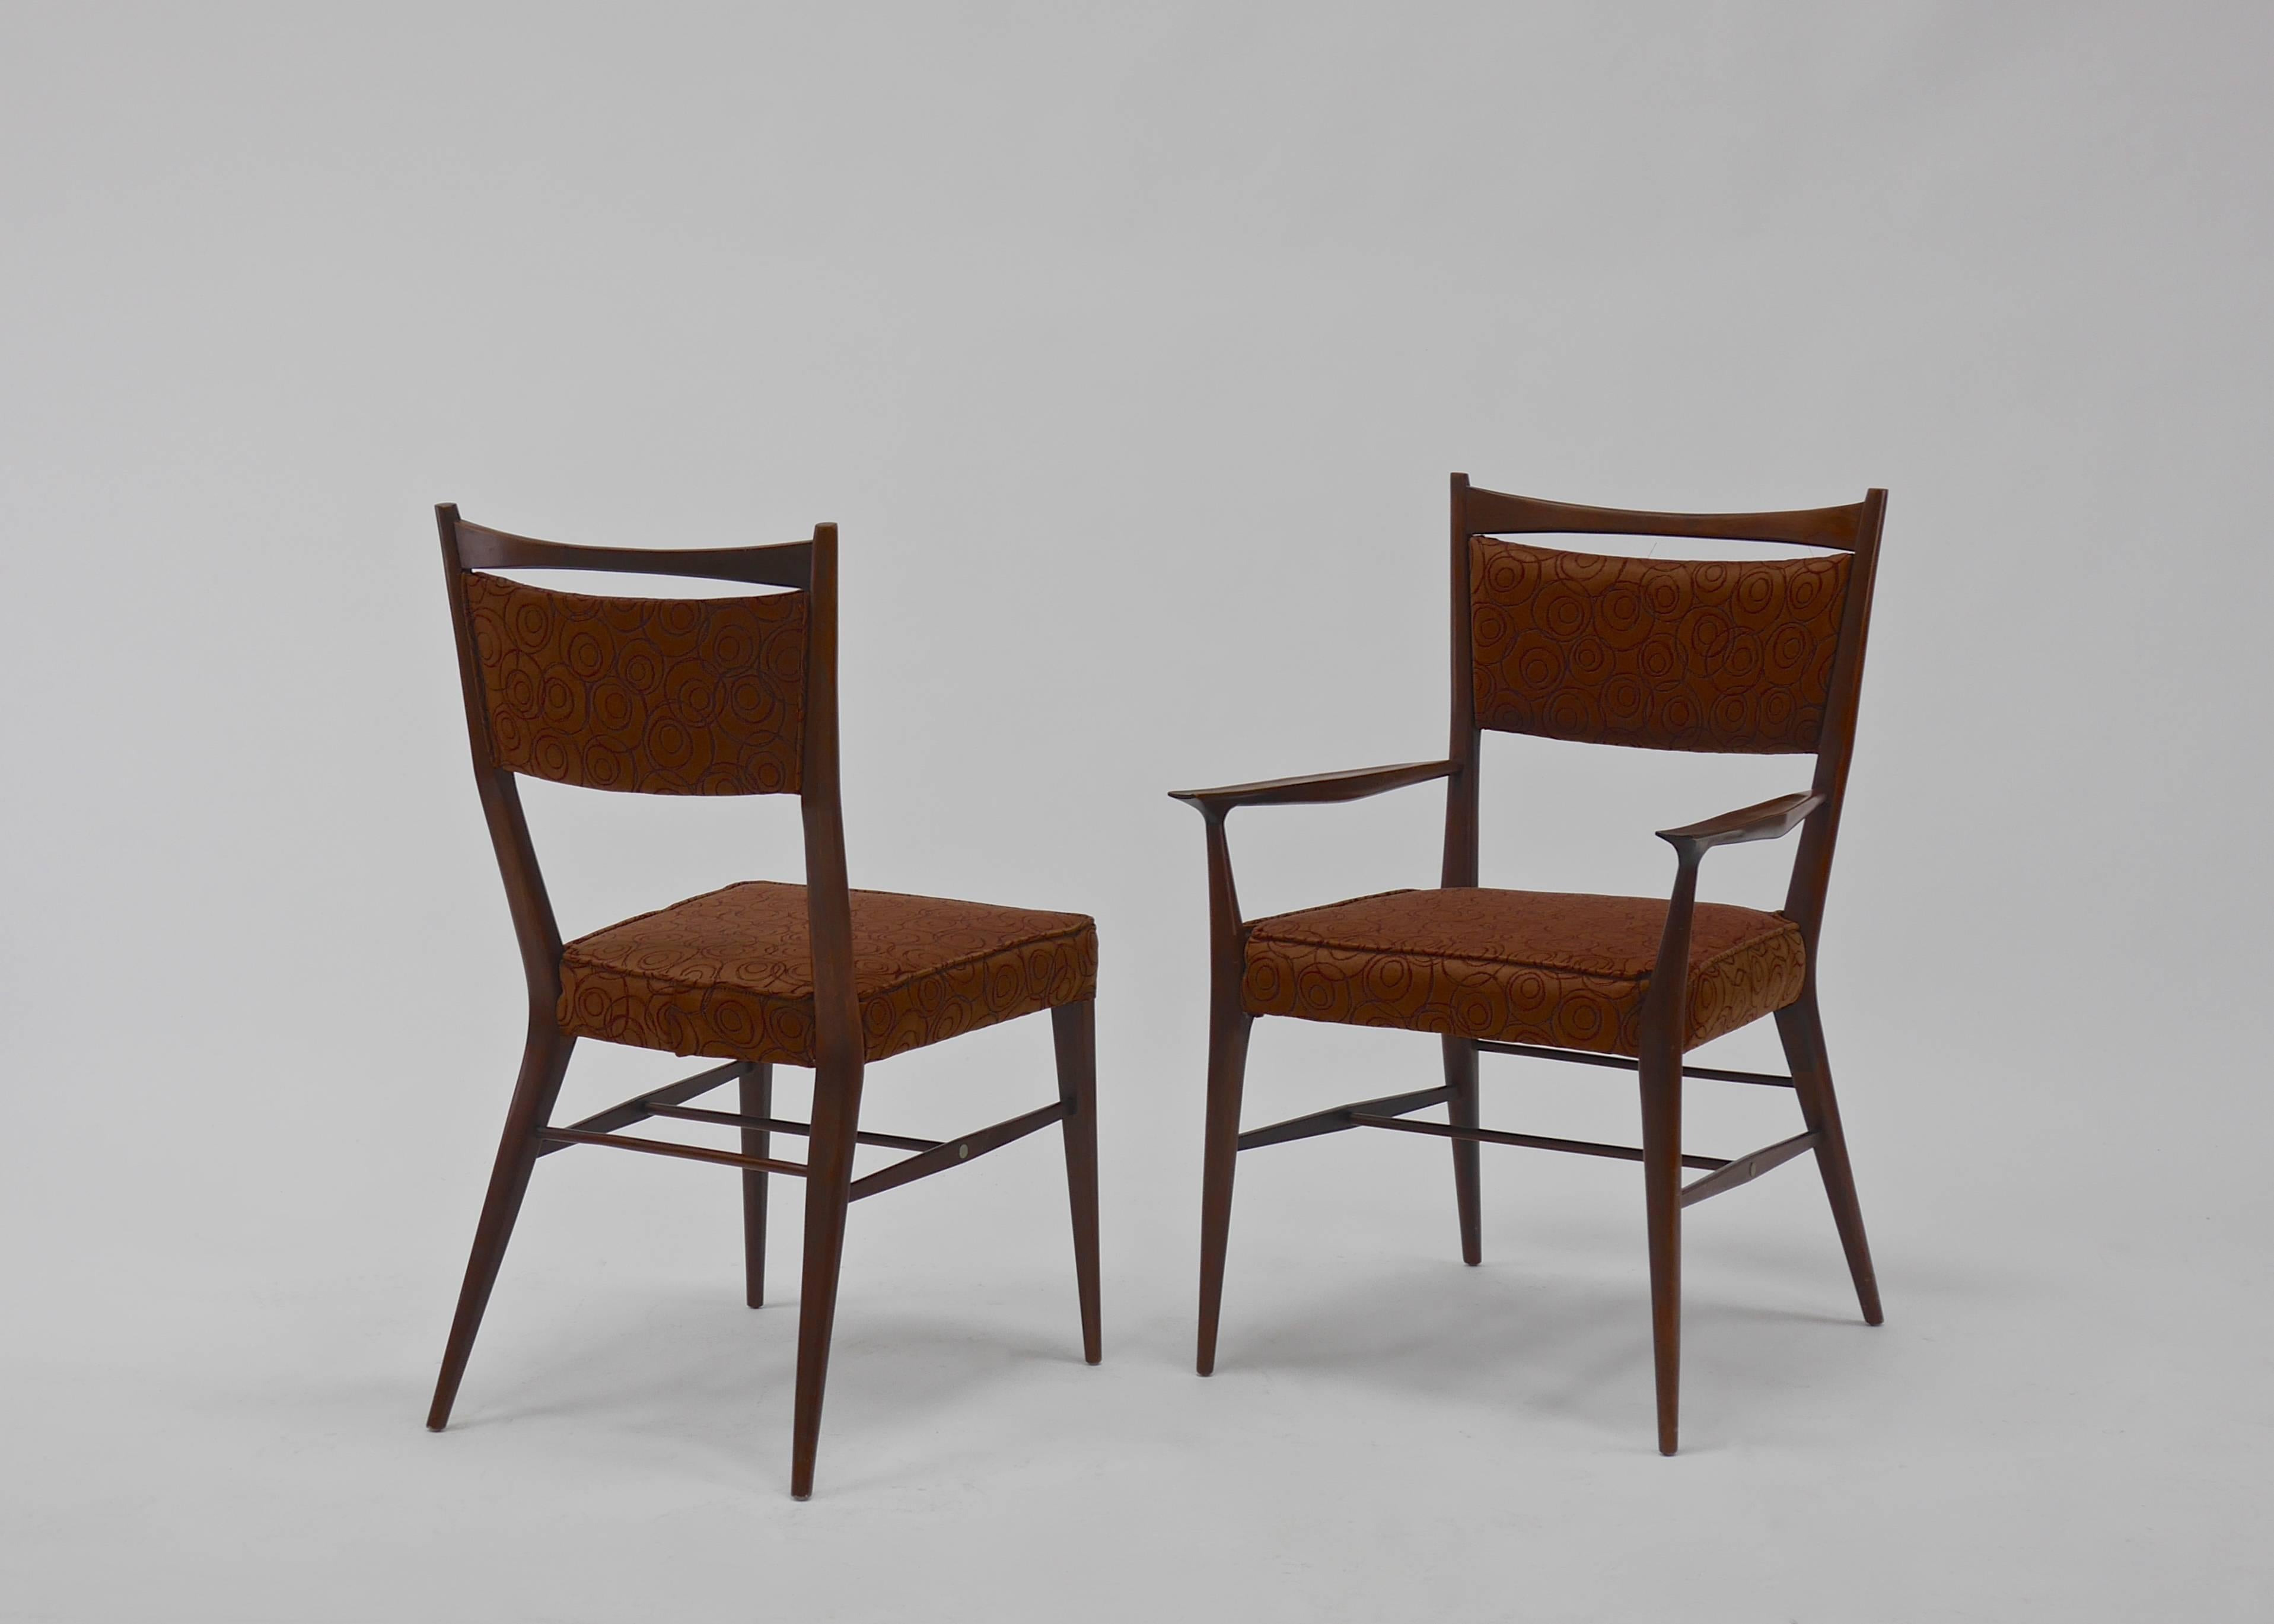 Eight Irwin collection dining chairs by Paul McCobb. Upholstered seats and backs. Good vintage condition. Walnut frames in an oiled finish.